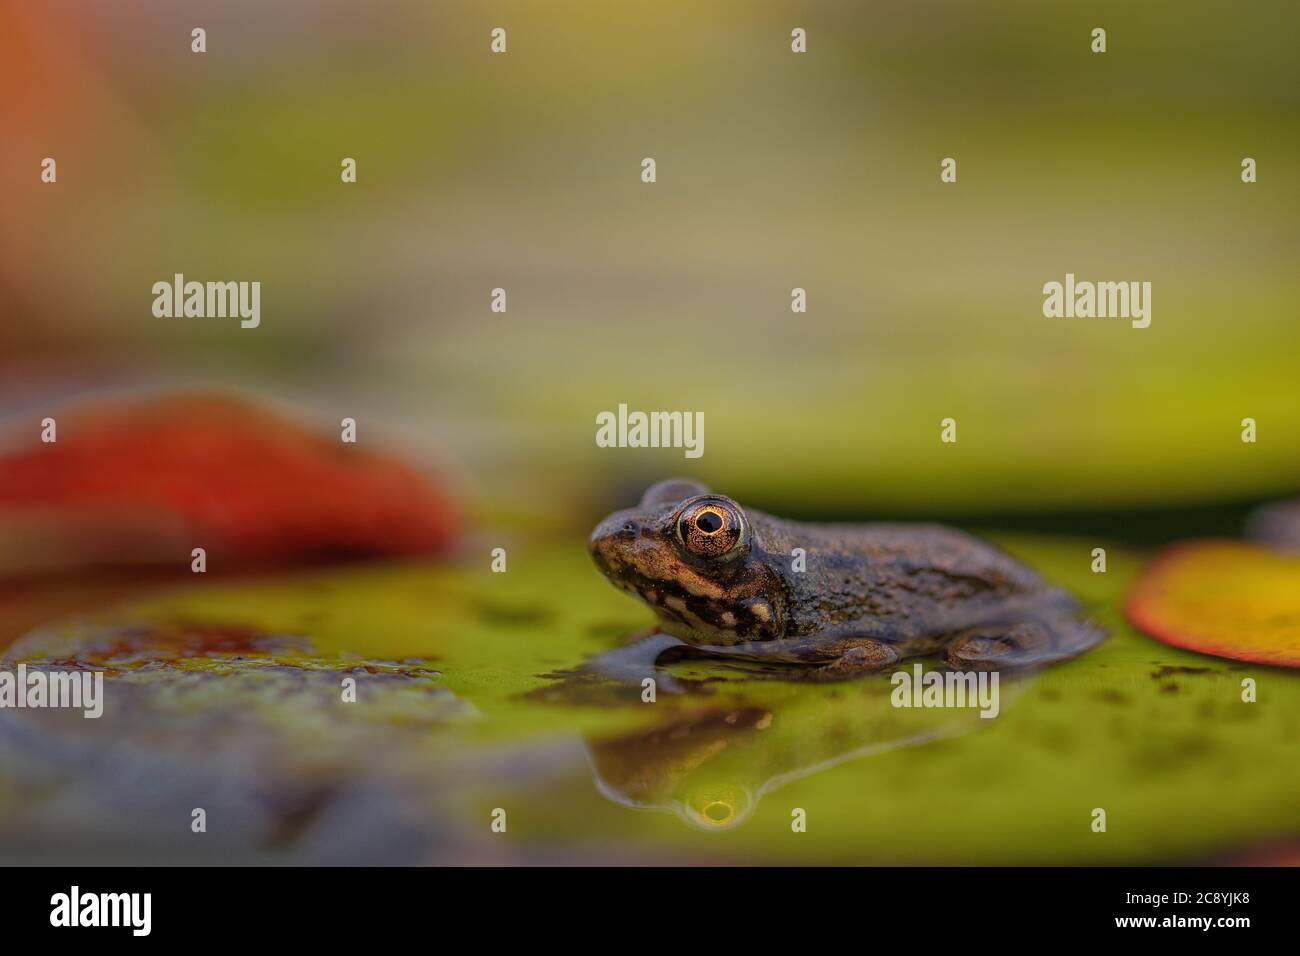 A small Green Frog rests on a lily pad. Stock Photo